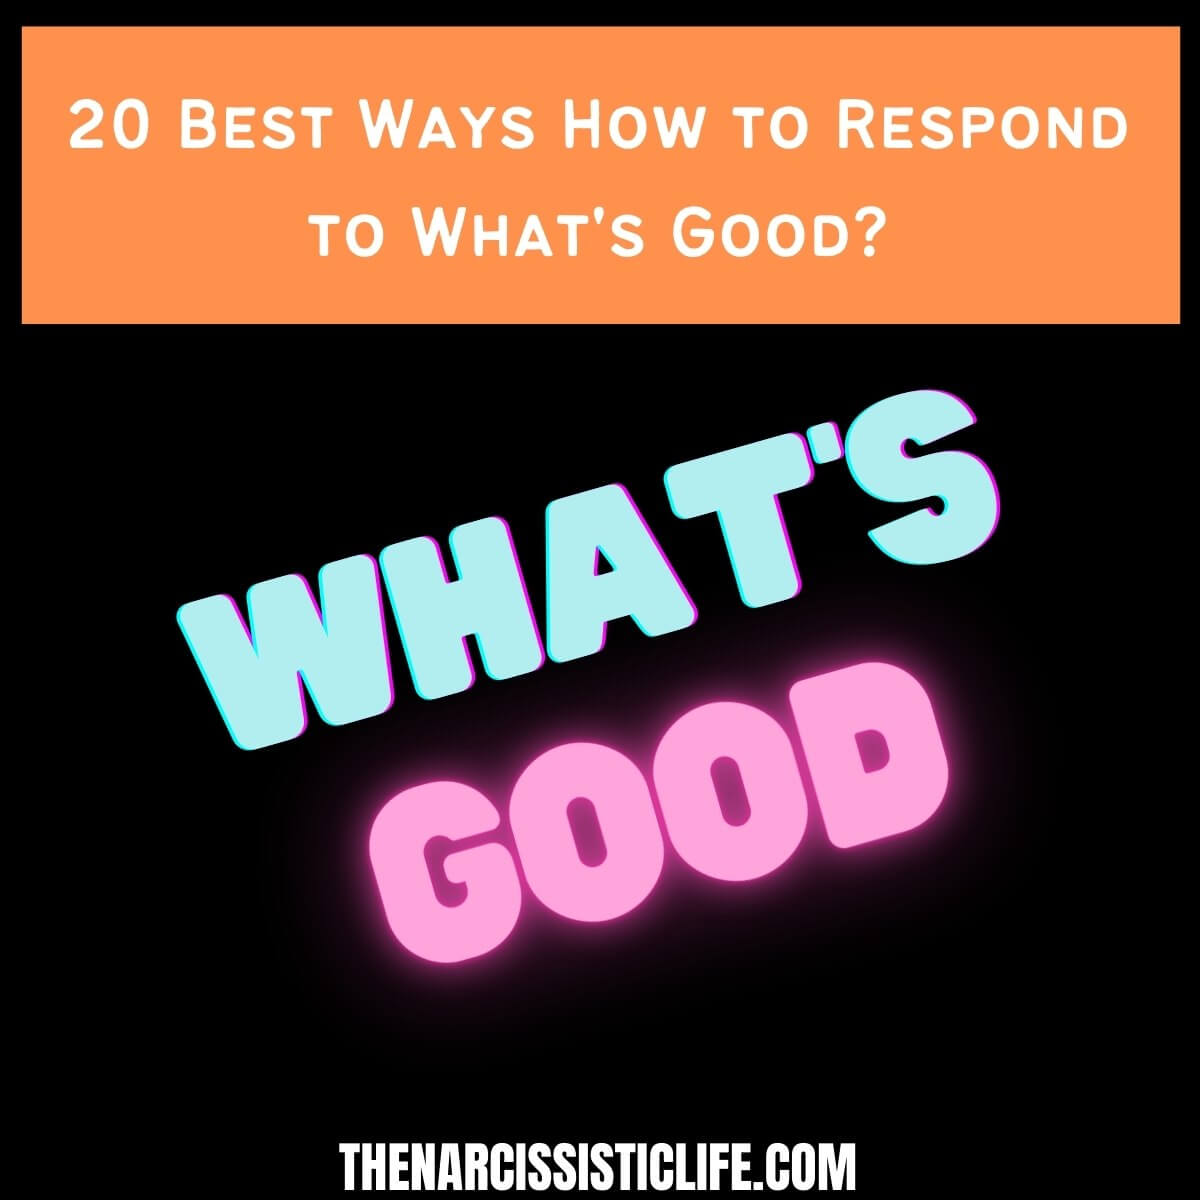 20 Best Ways How to Respond to What's Good? - The Narcissistic Life